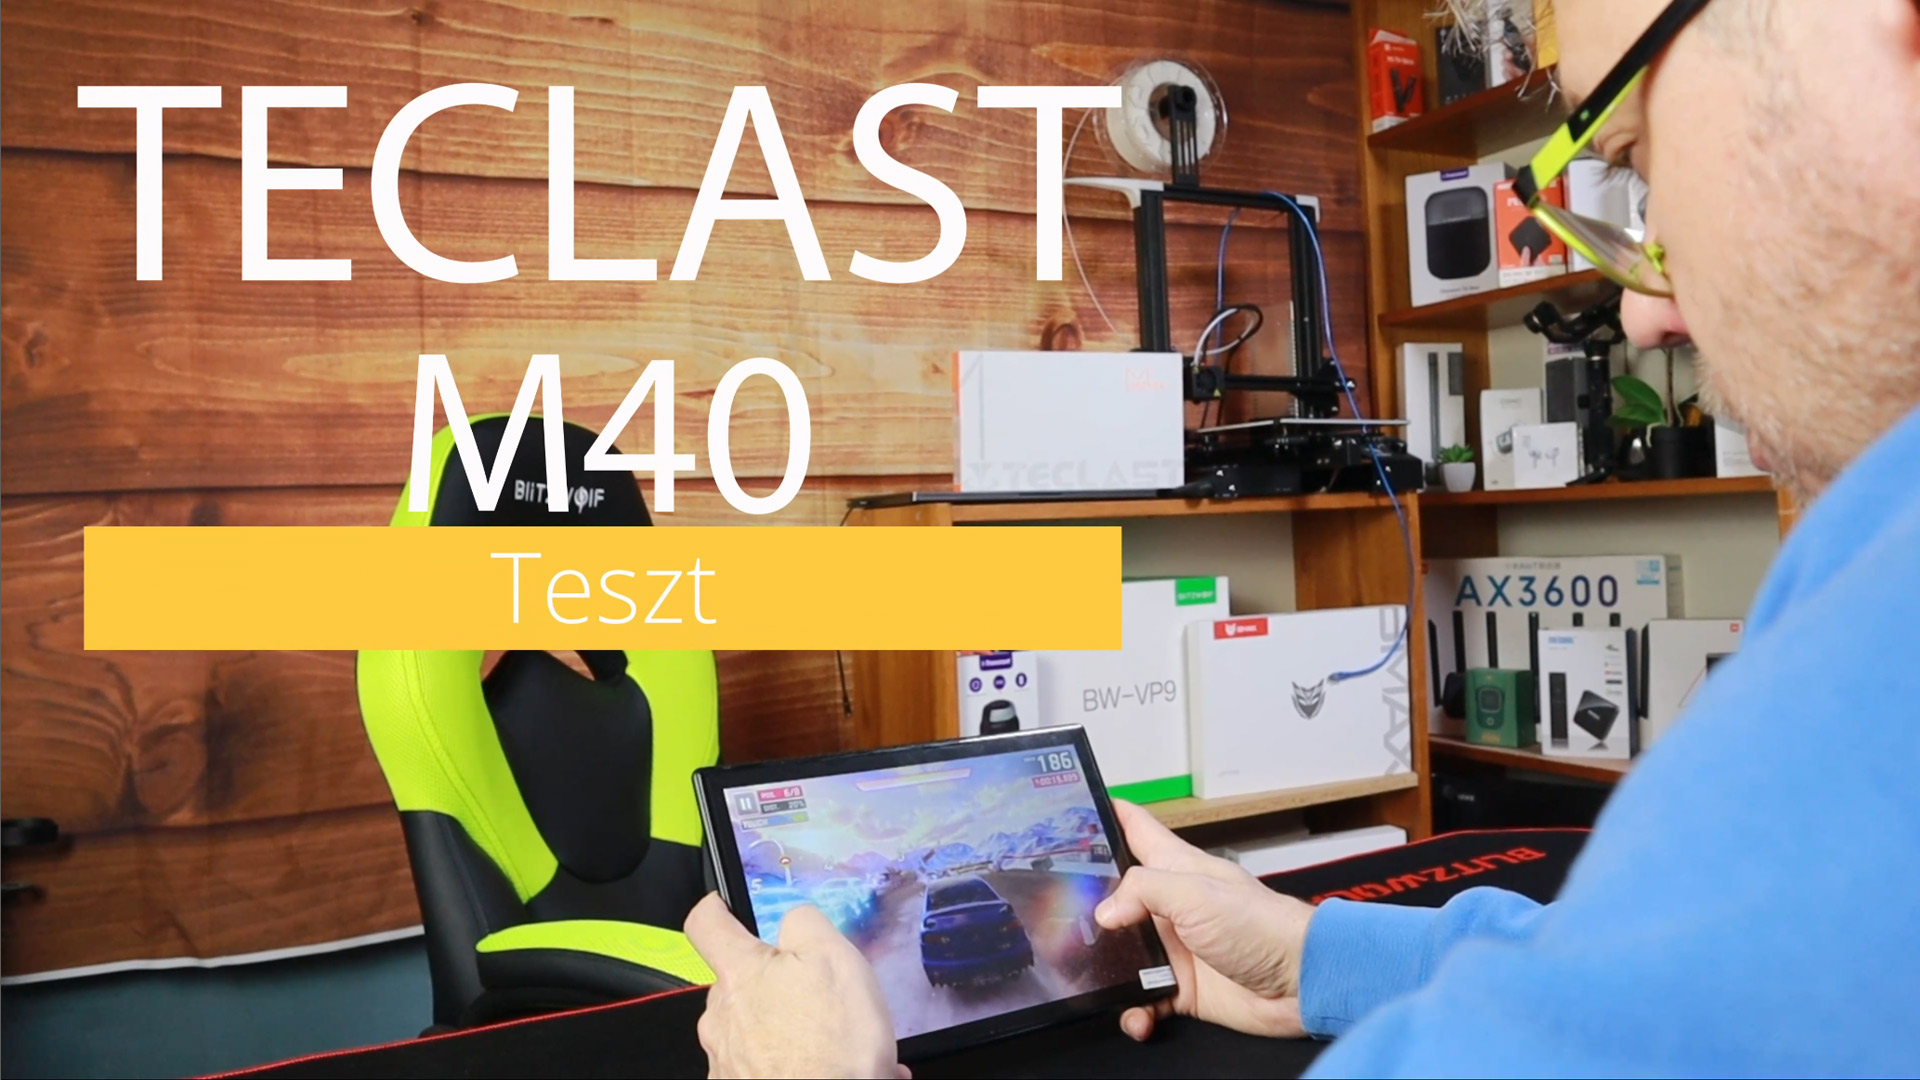 teclast-m40-review-cover.jpg